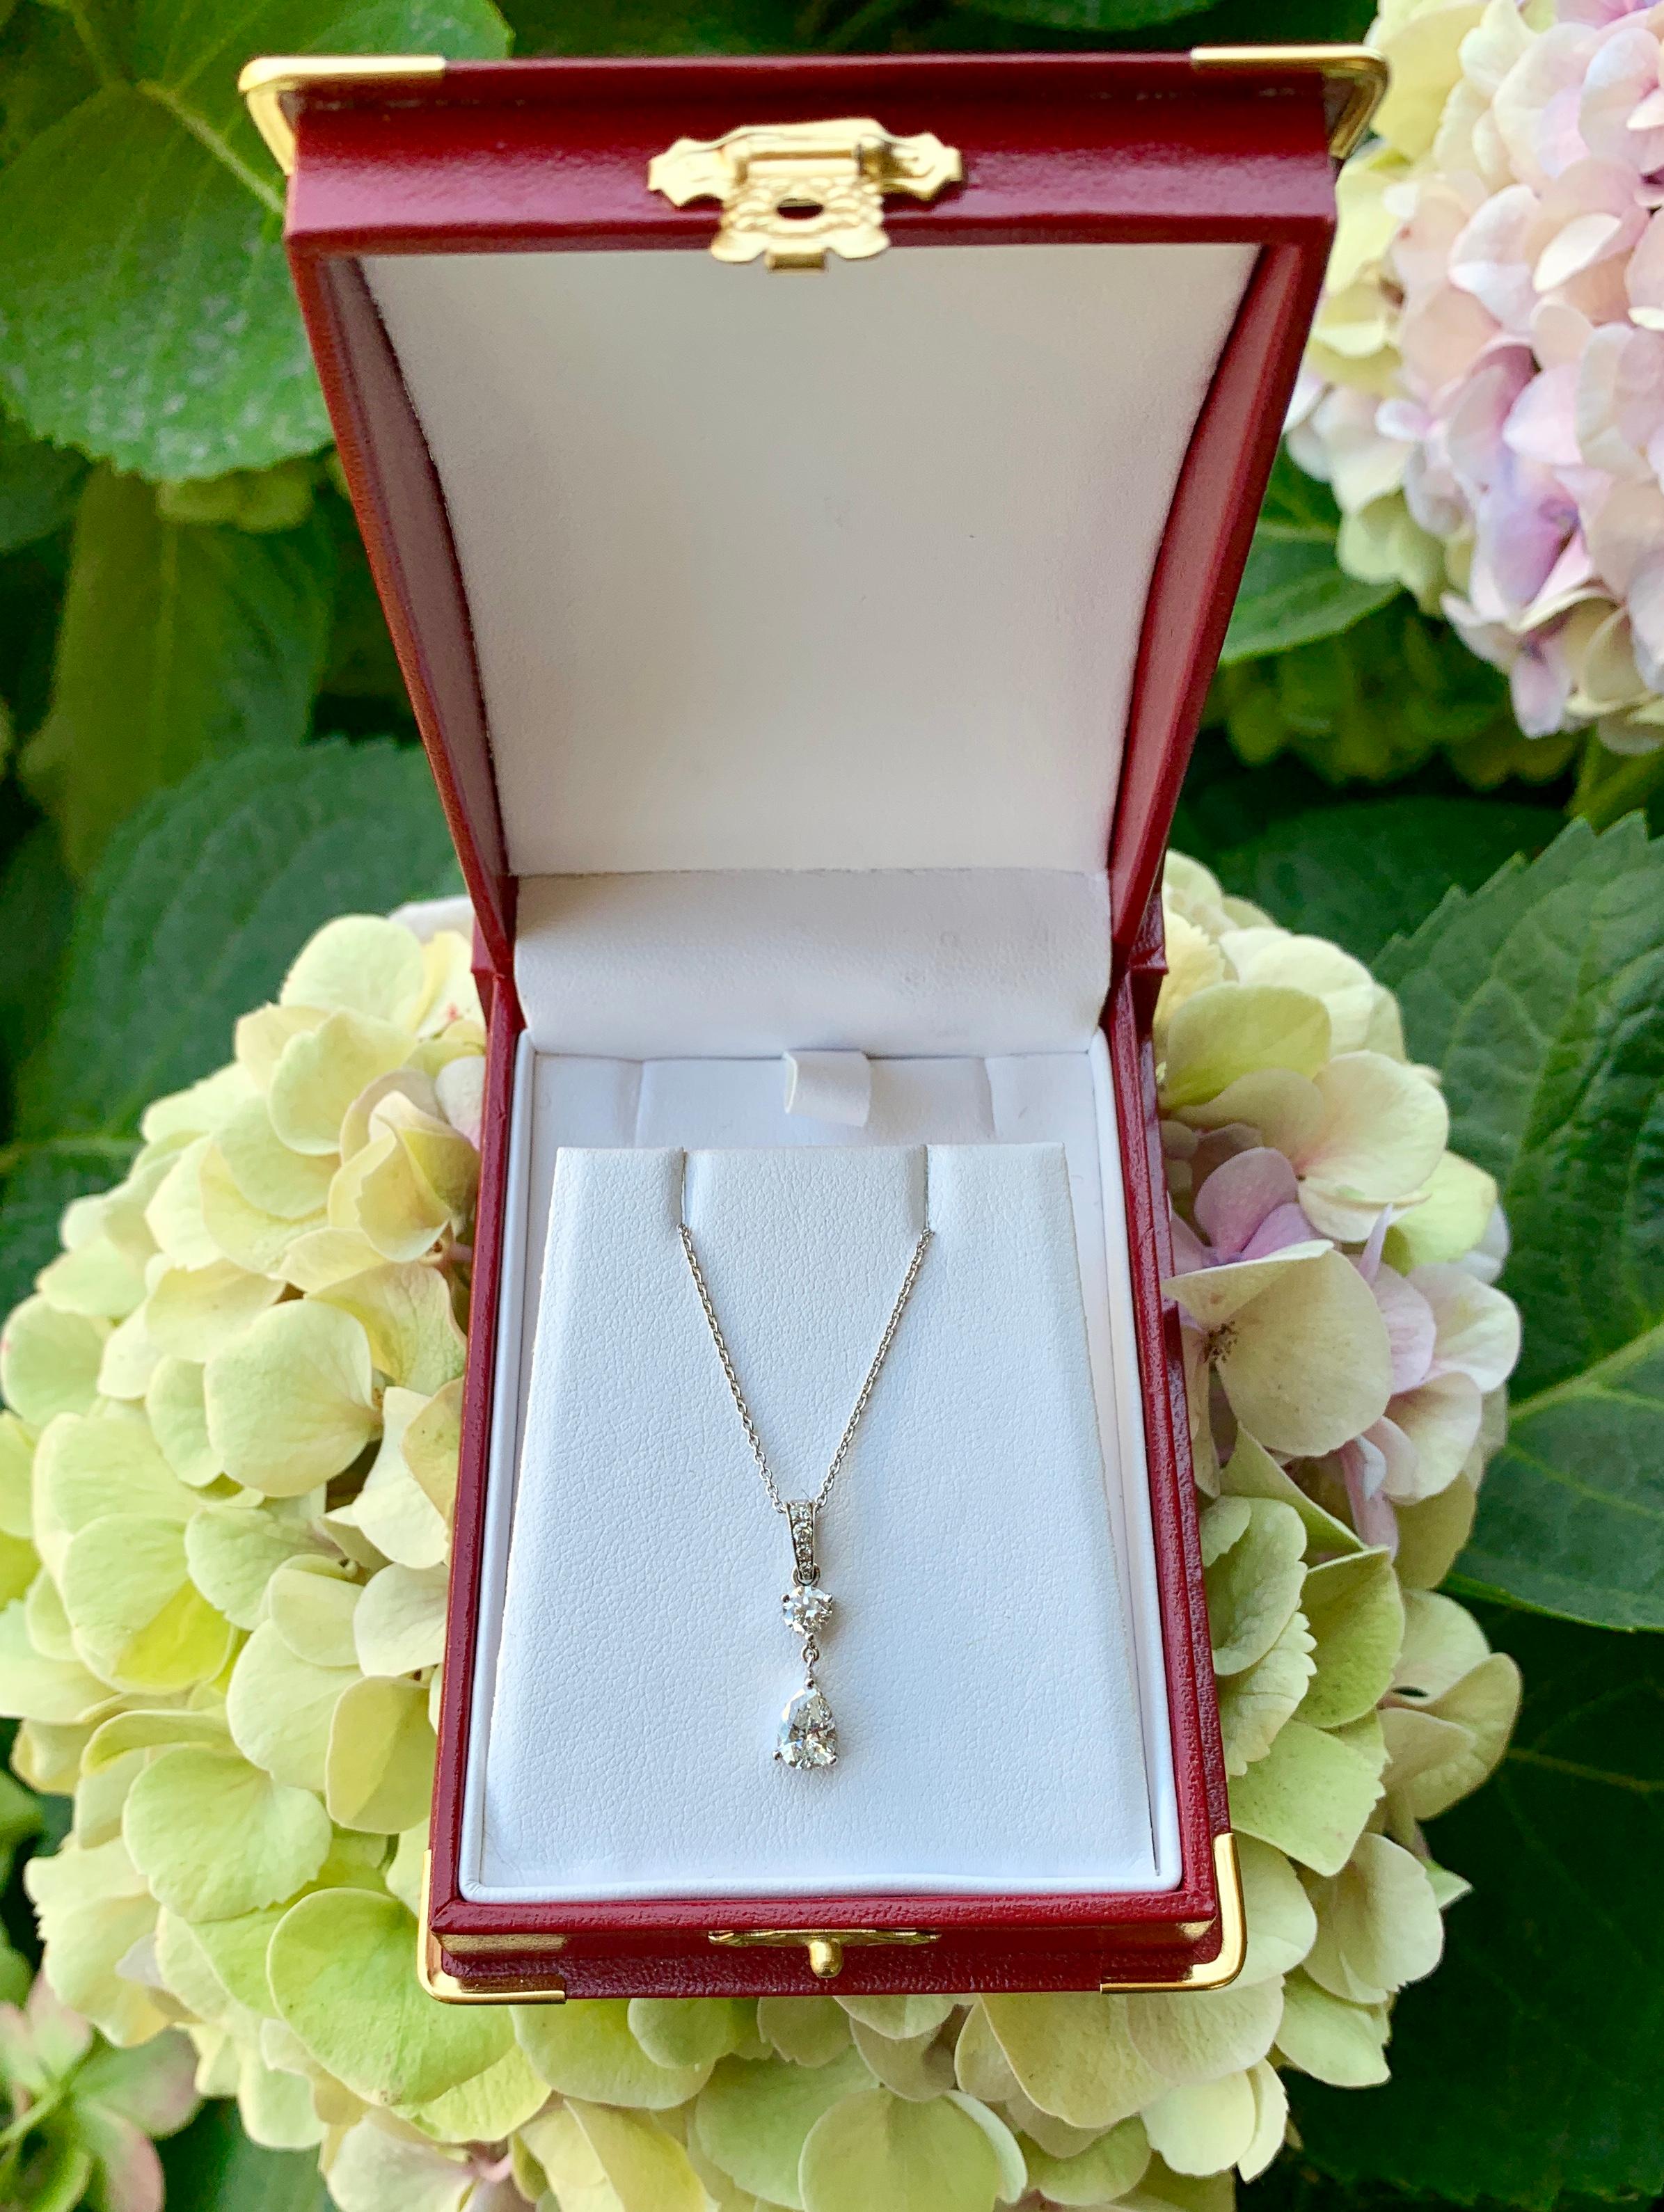 Contemporary 1 Carat Diamonds White Gold Pendant Necklace Pear Cut with Round Diamond Accents